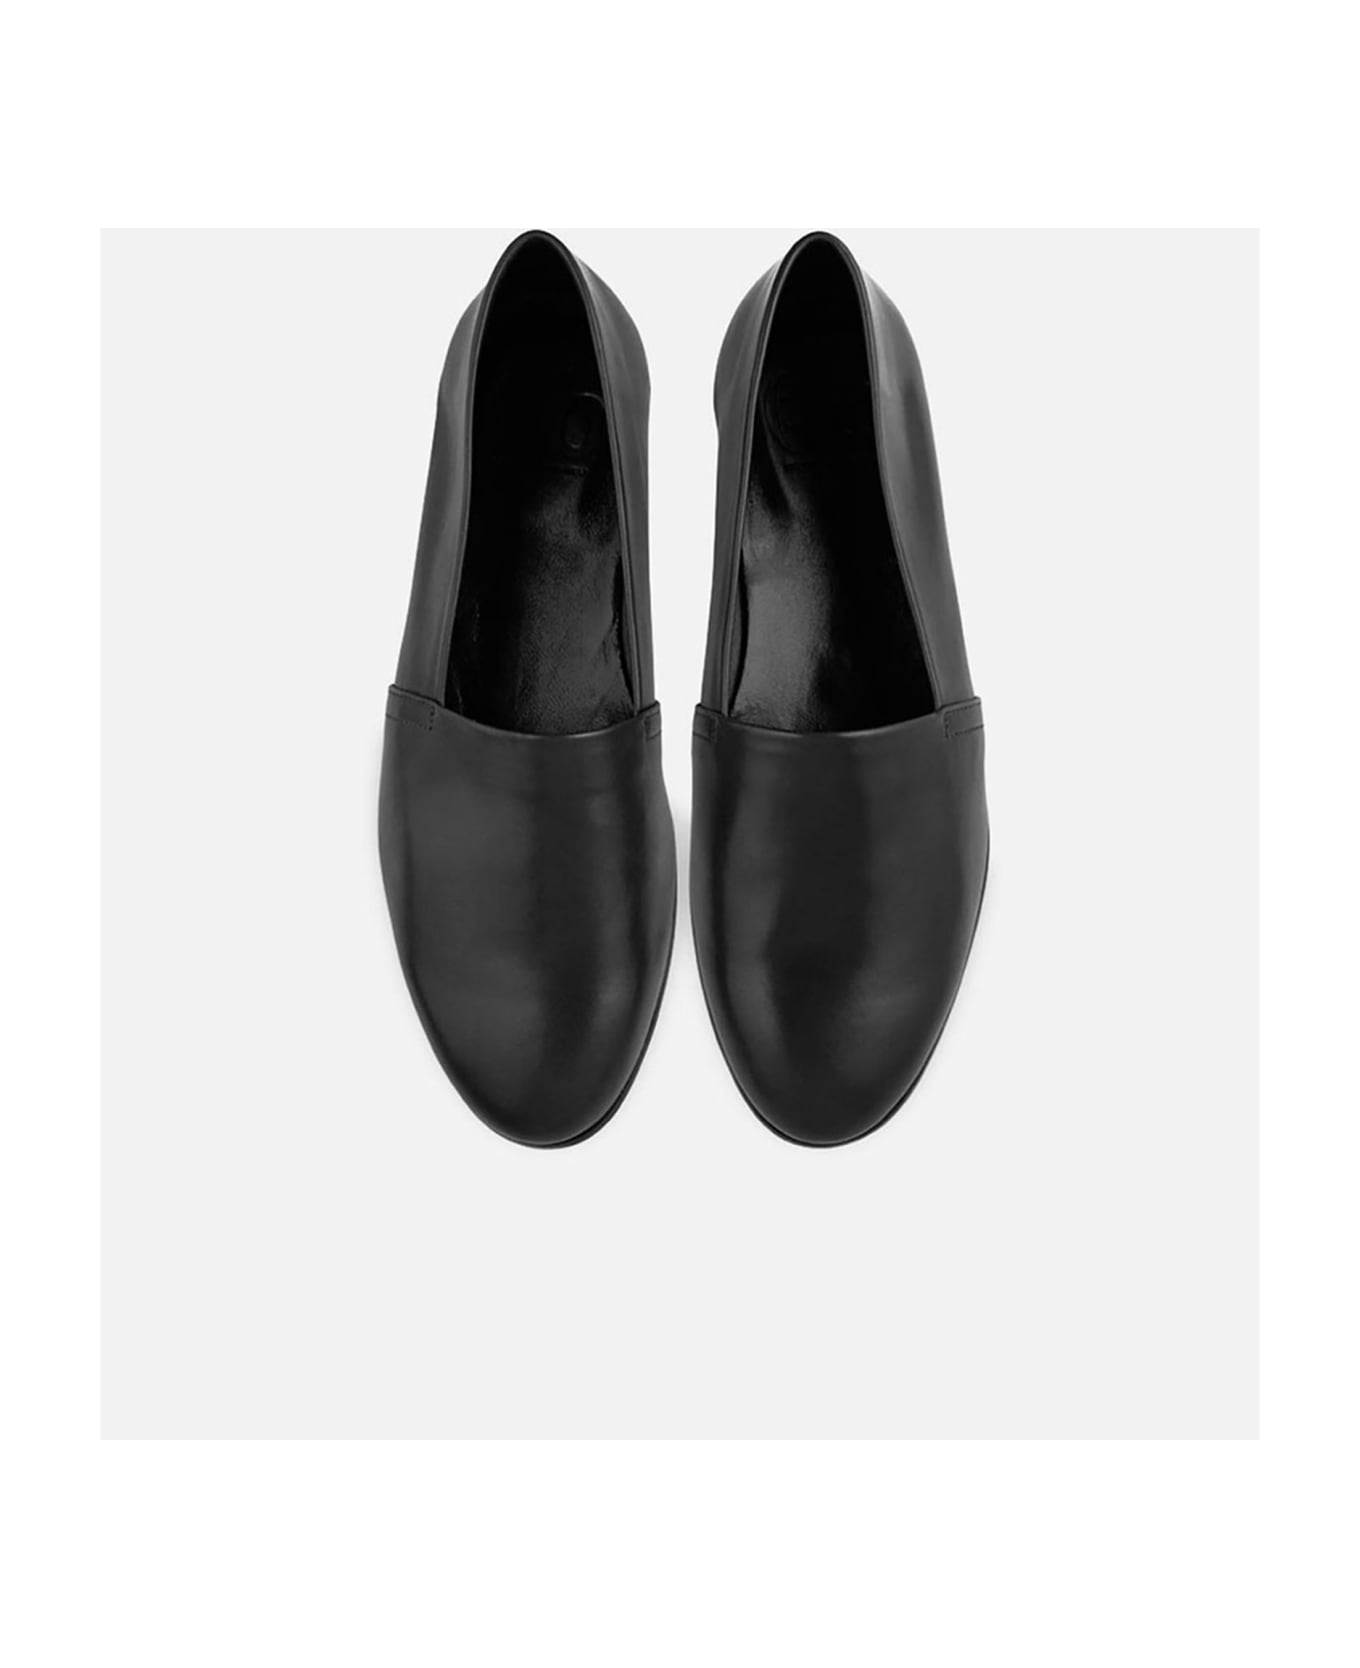 CB Made in Italy Leather Slip-on Amalfi - Black